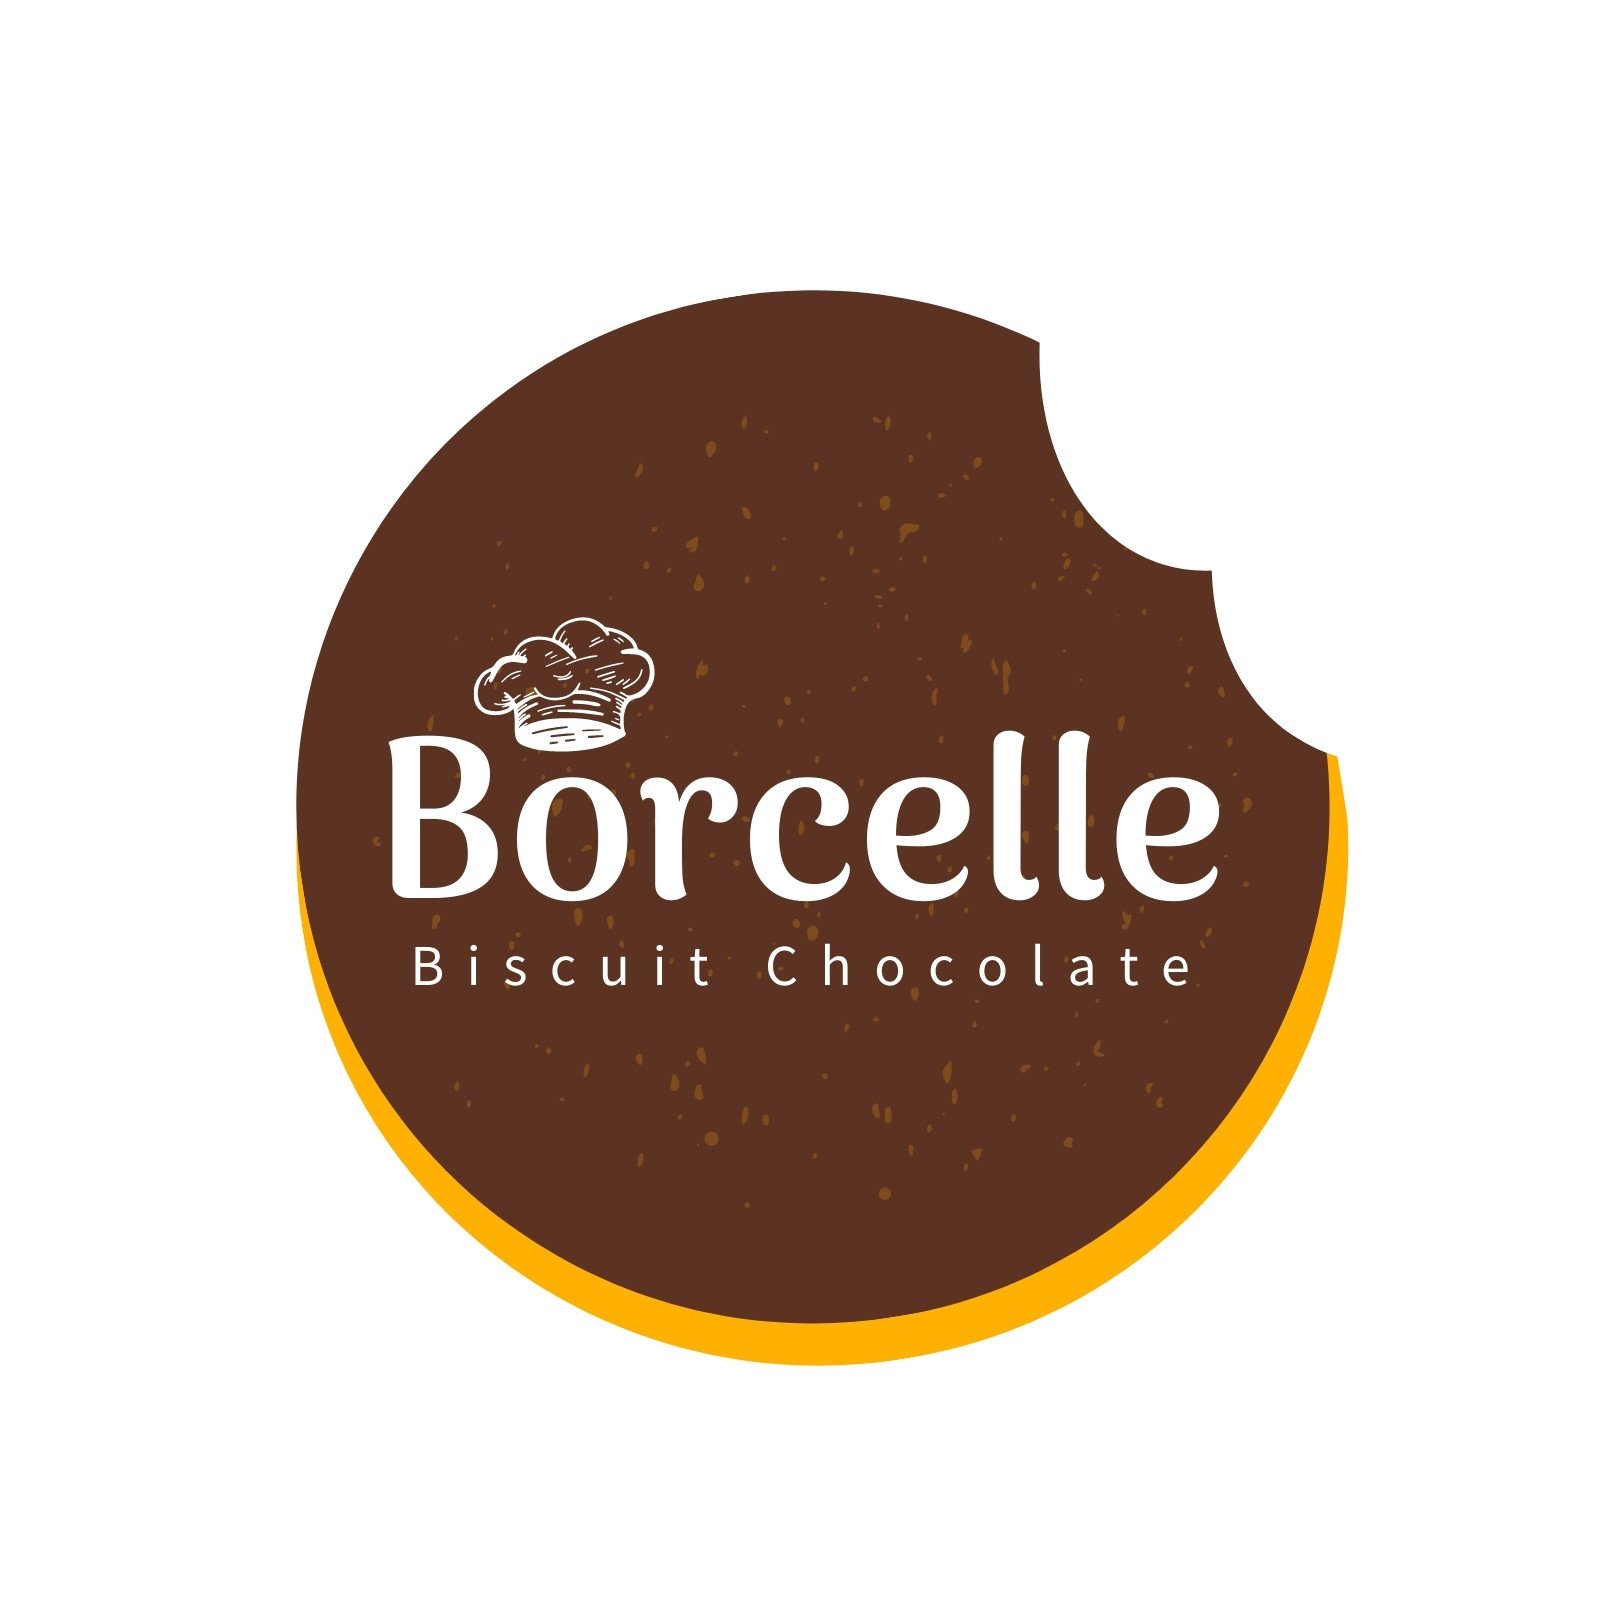 Seattle Chocolate Company | May chocolate be your umbrella